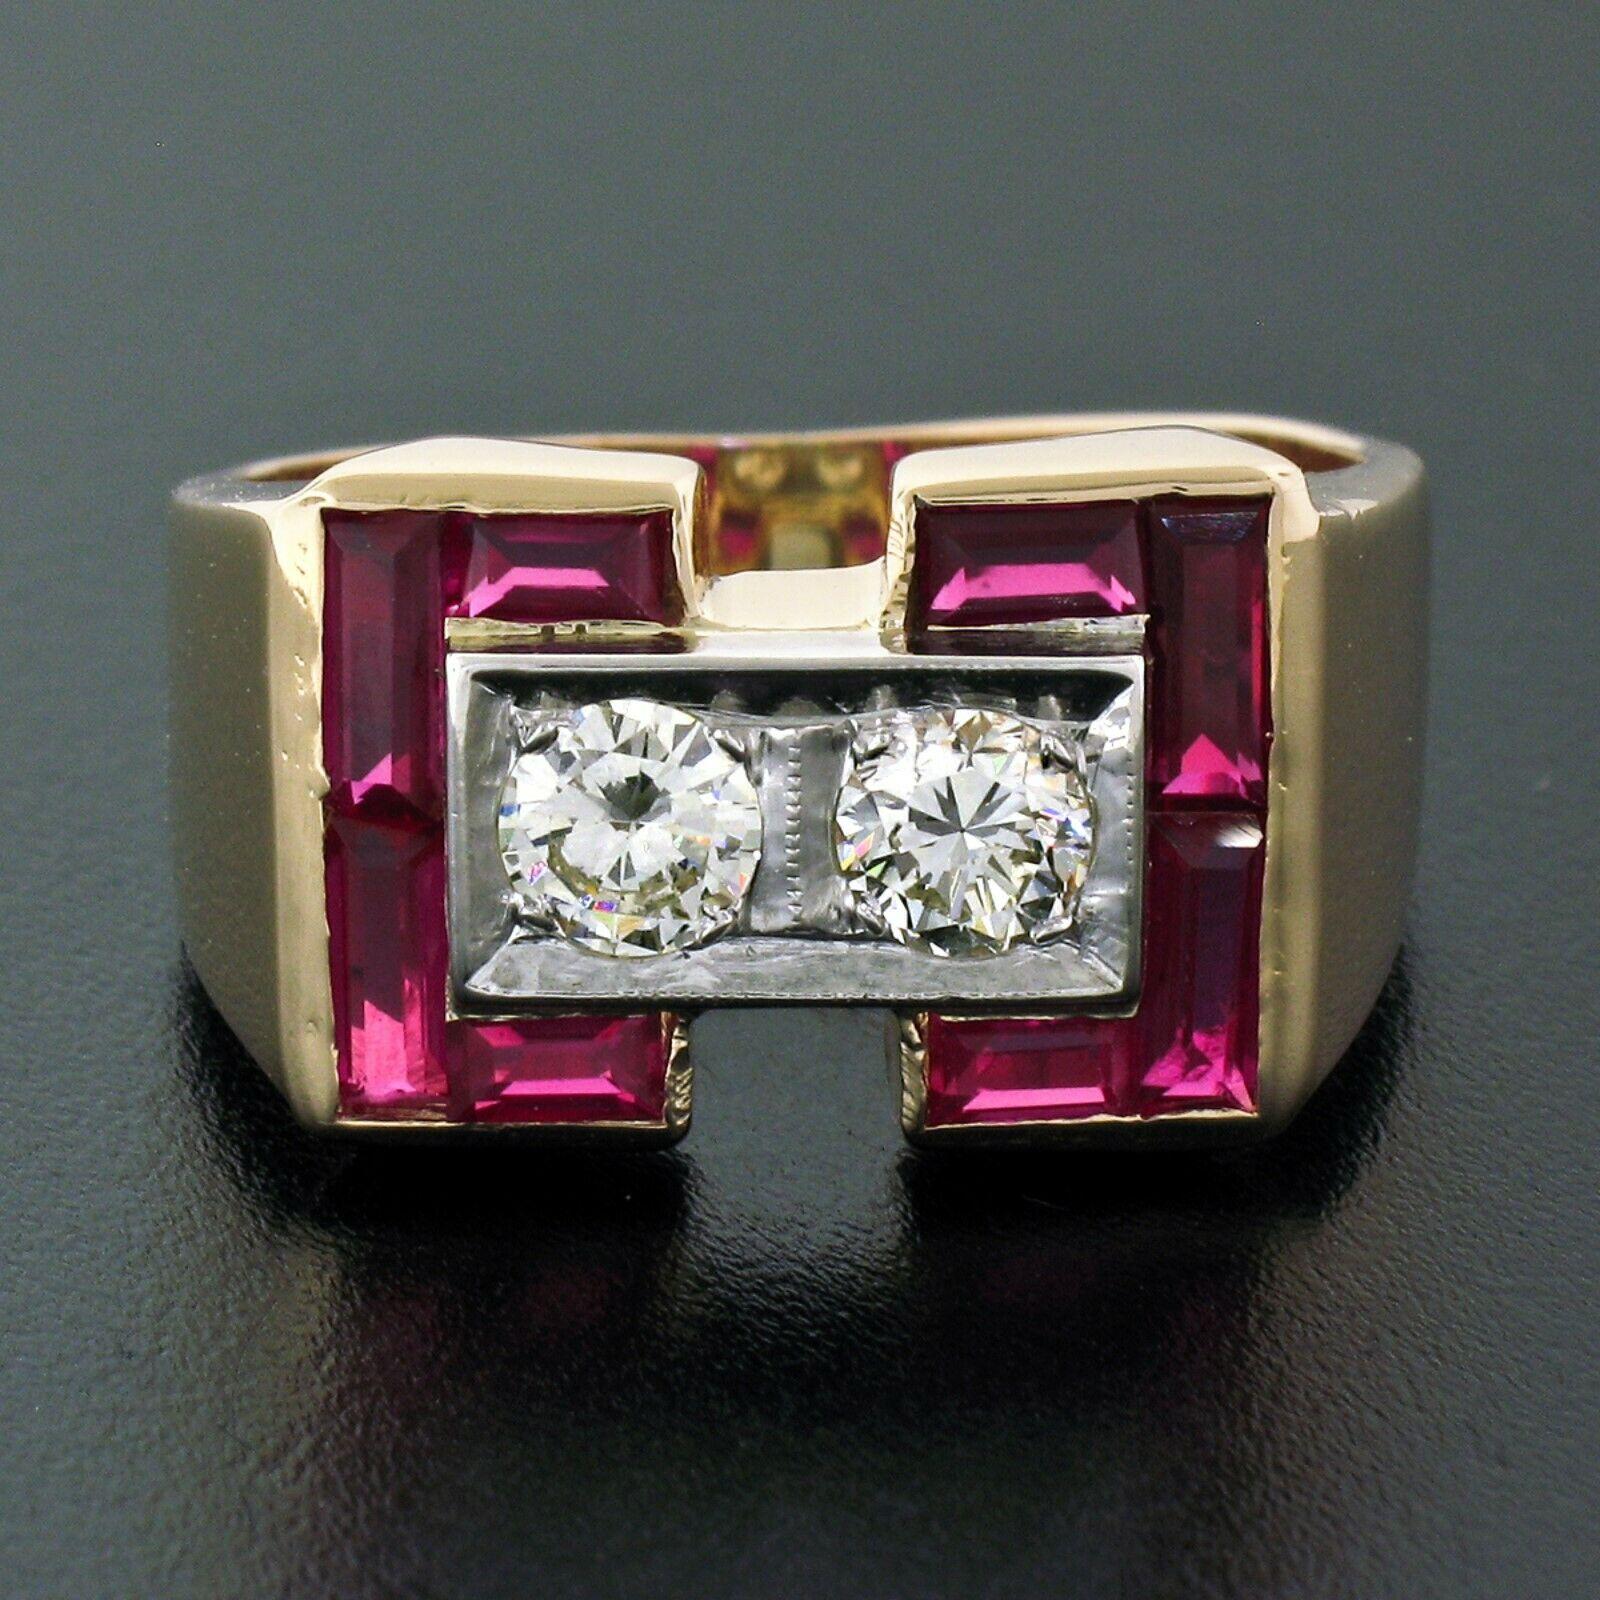 You are looking at an amazing men's retro ring crafted in solid 14k rosy yellow gold and features 2 large diamonds set at its center and wonderful synthetic ruby stones that accent both sides of its unique, wide design. The diamonds display